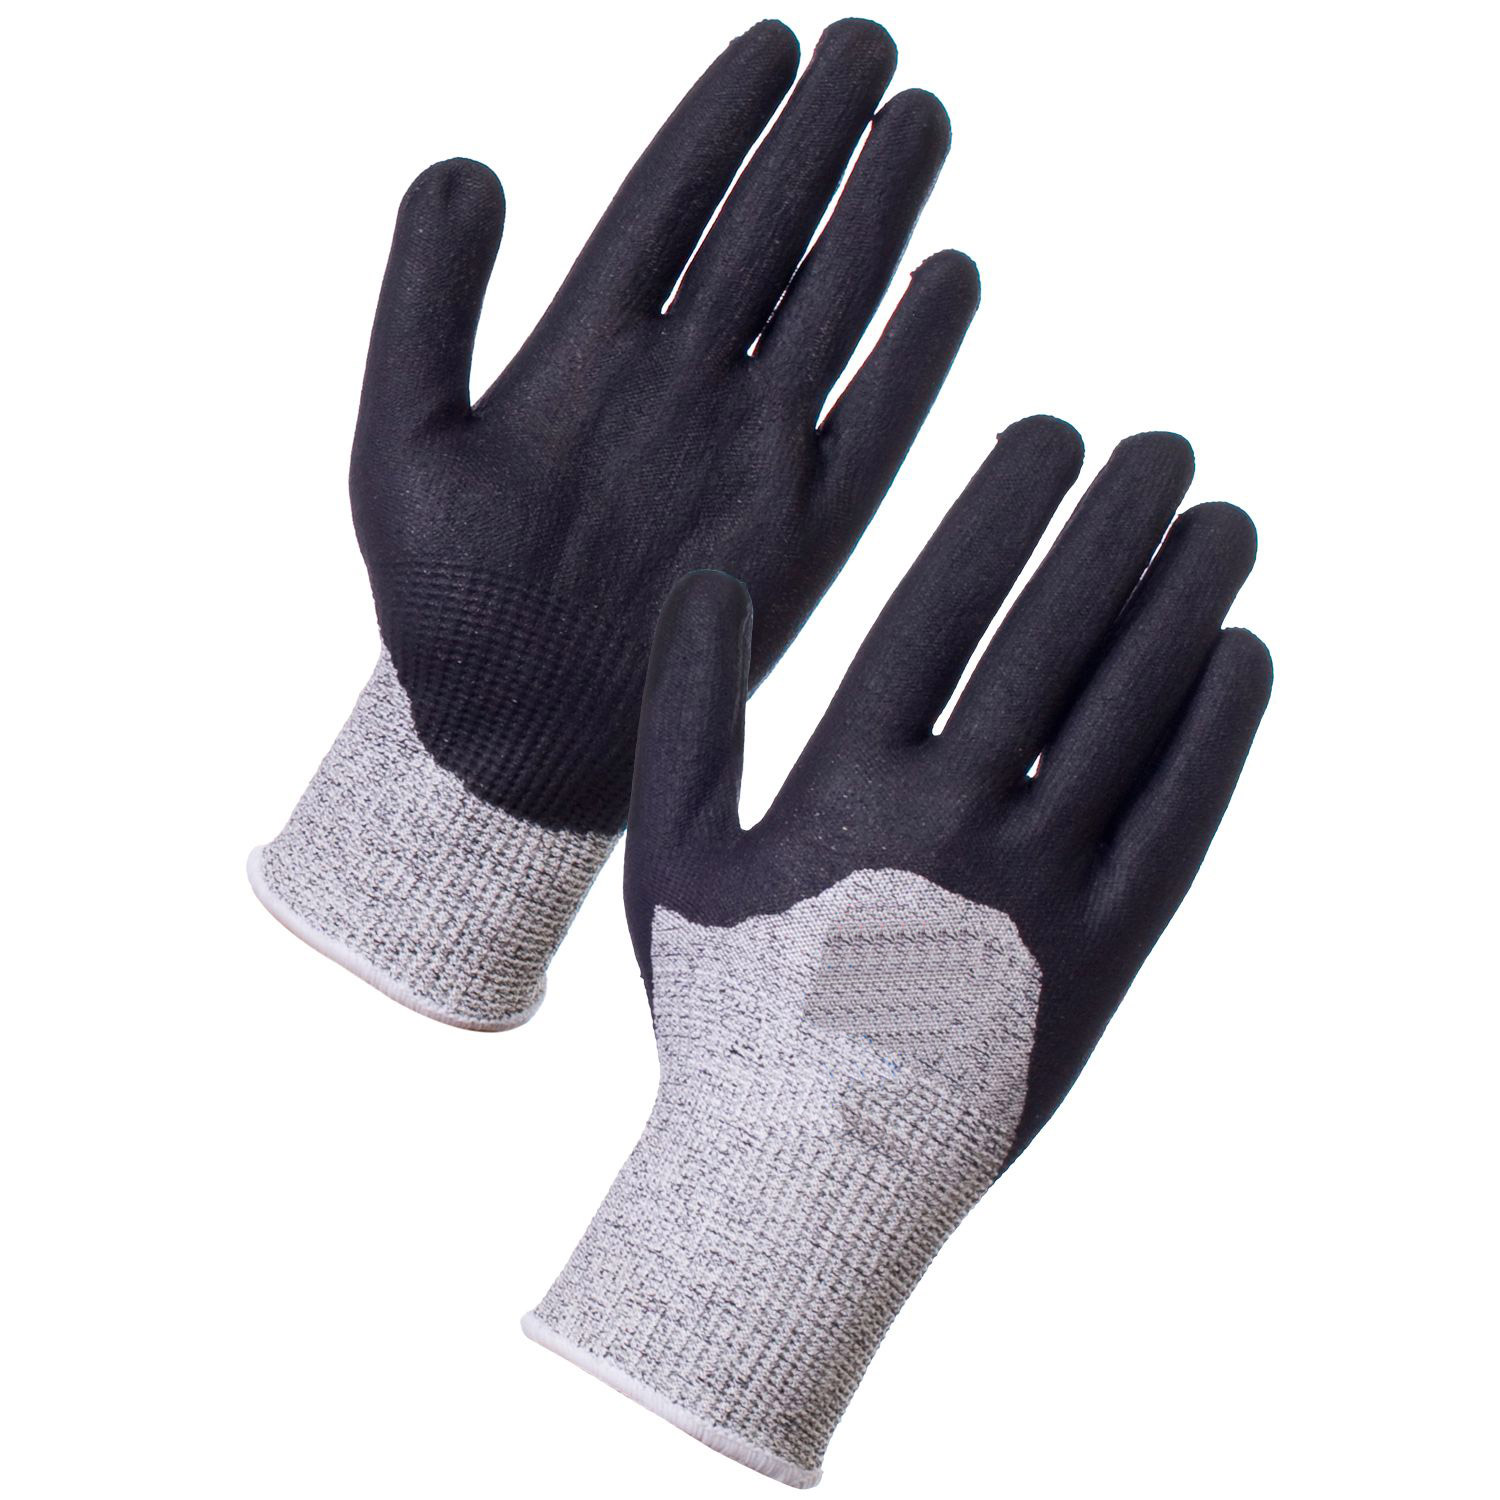 Breathable Wear-Resistant Cut Resistant Gloves with Great Grip